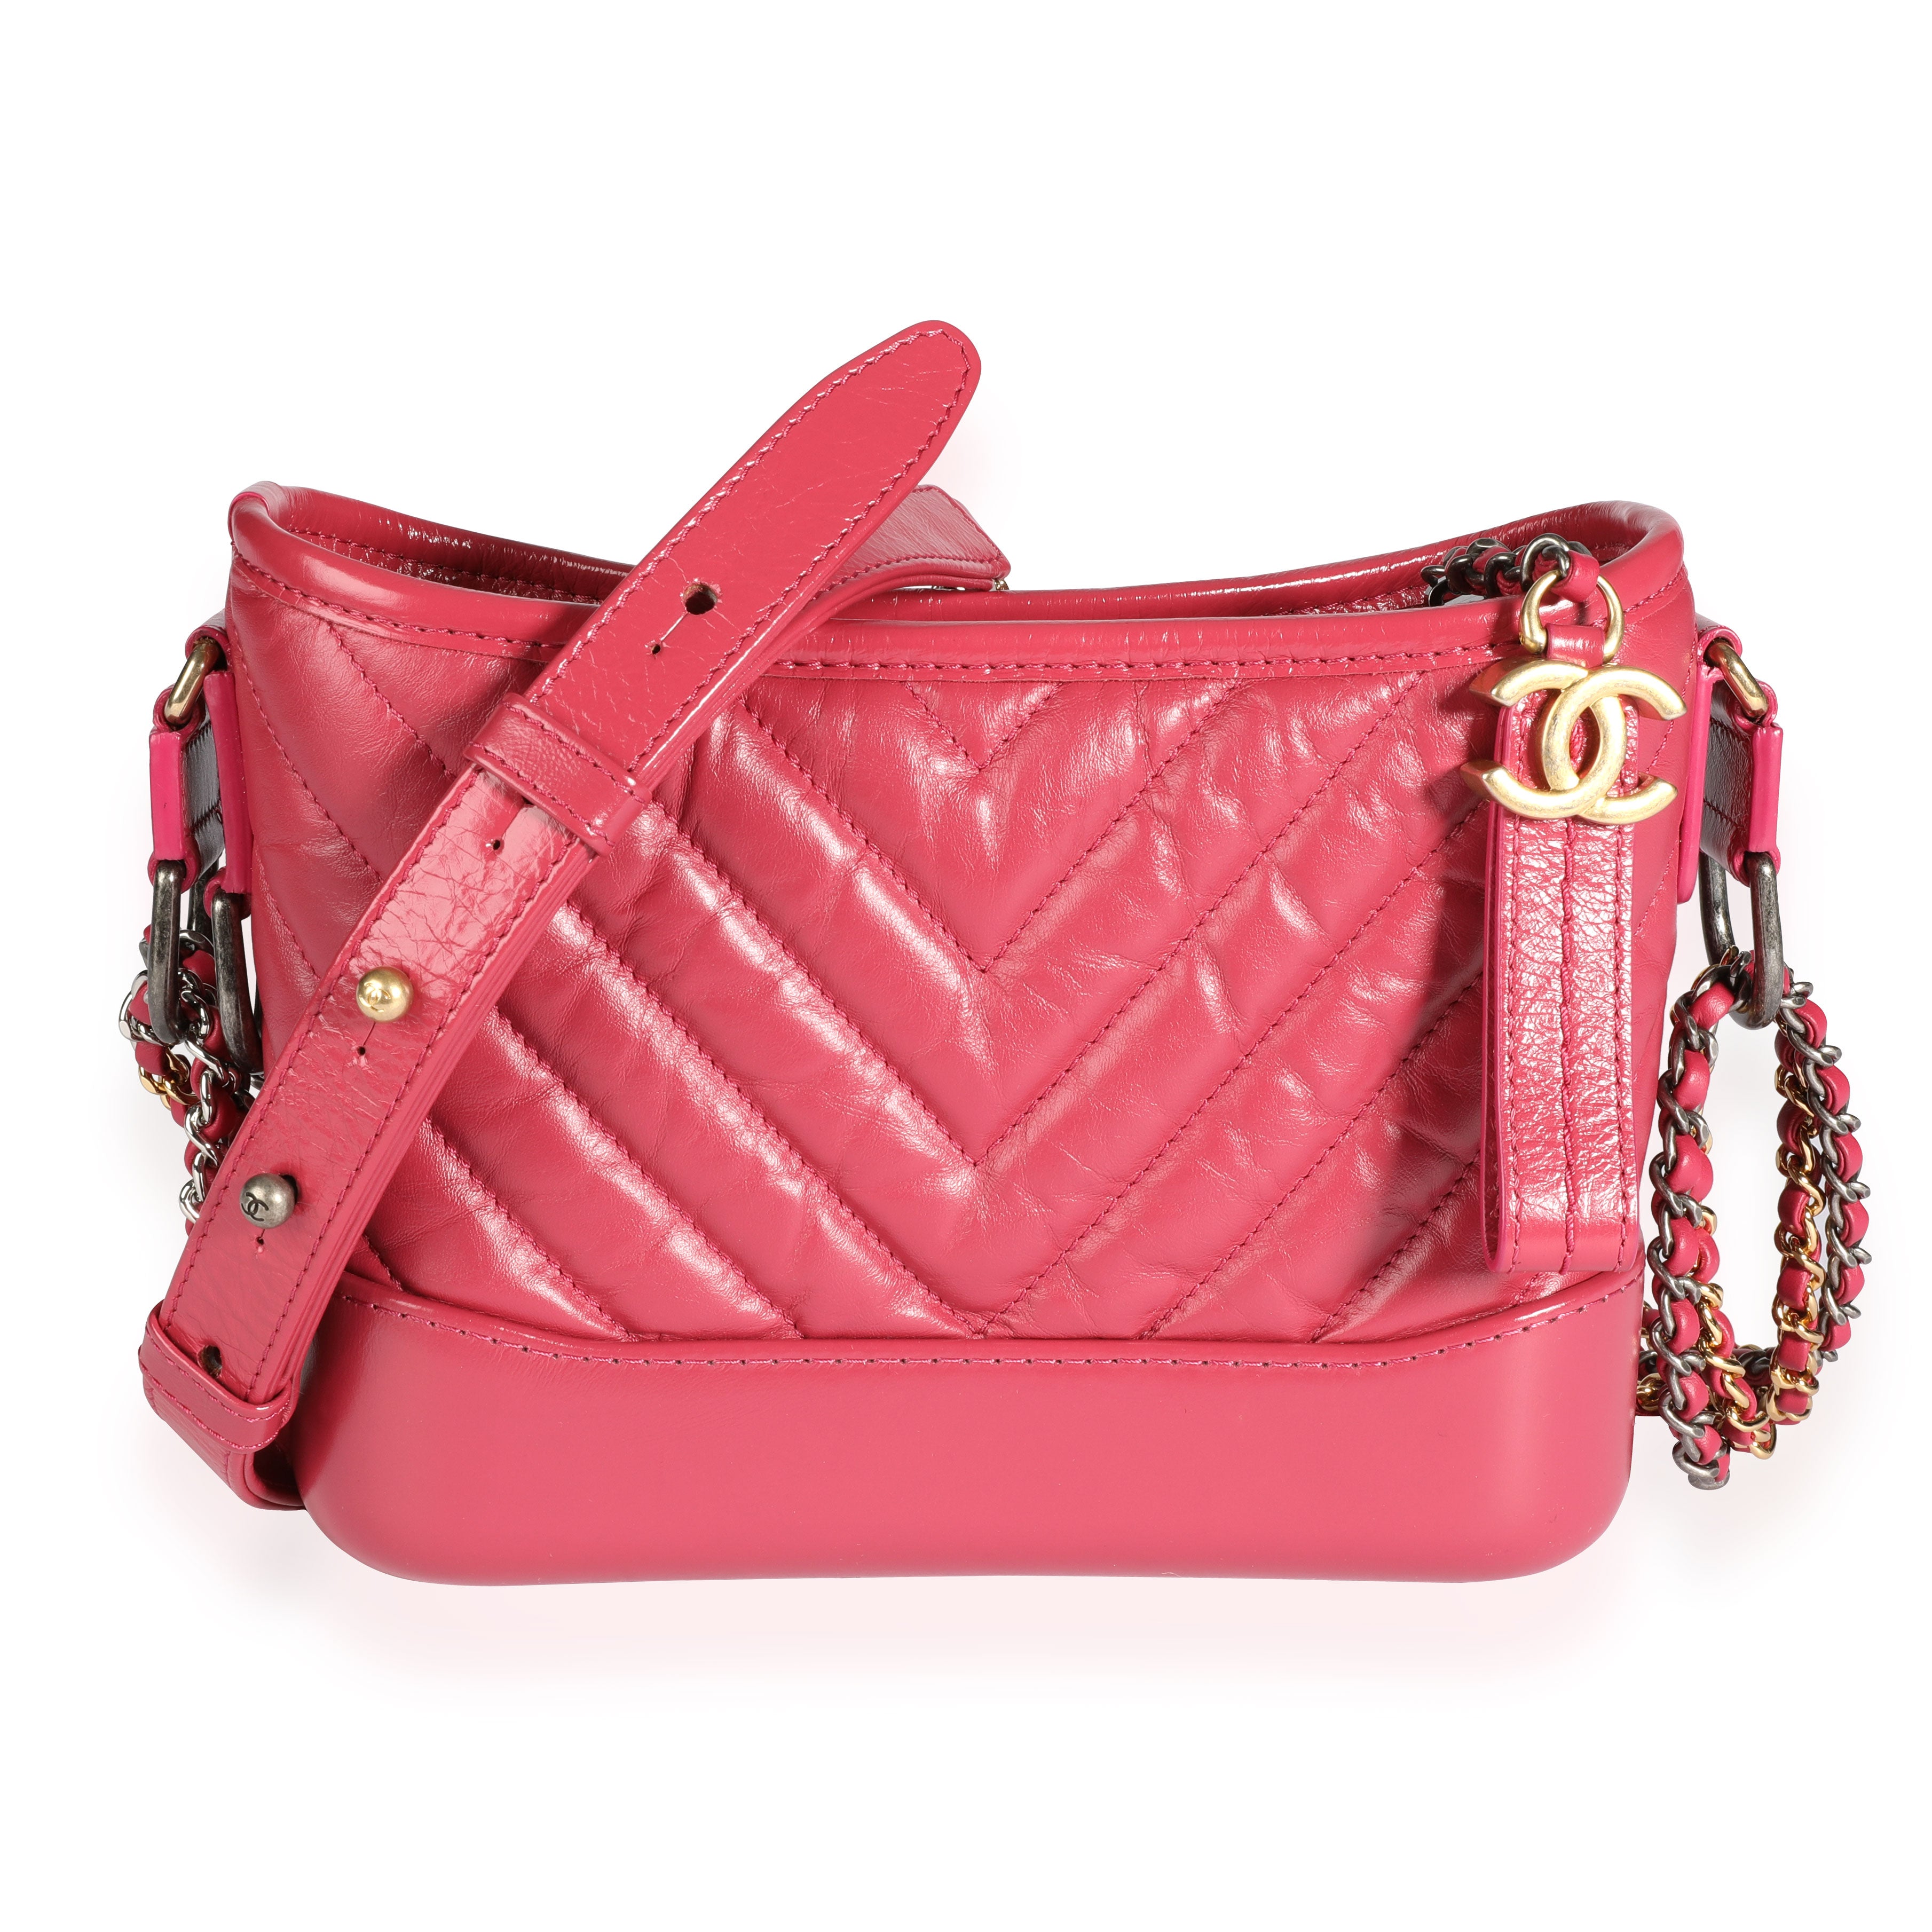 Chanel Gabrielle Large Hobo Bag - Red/Pink